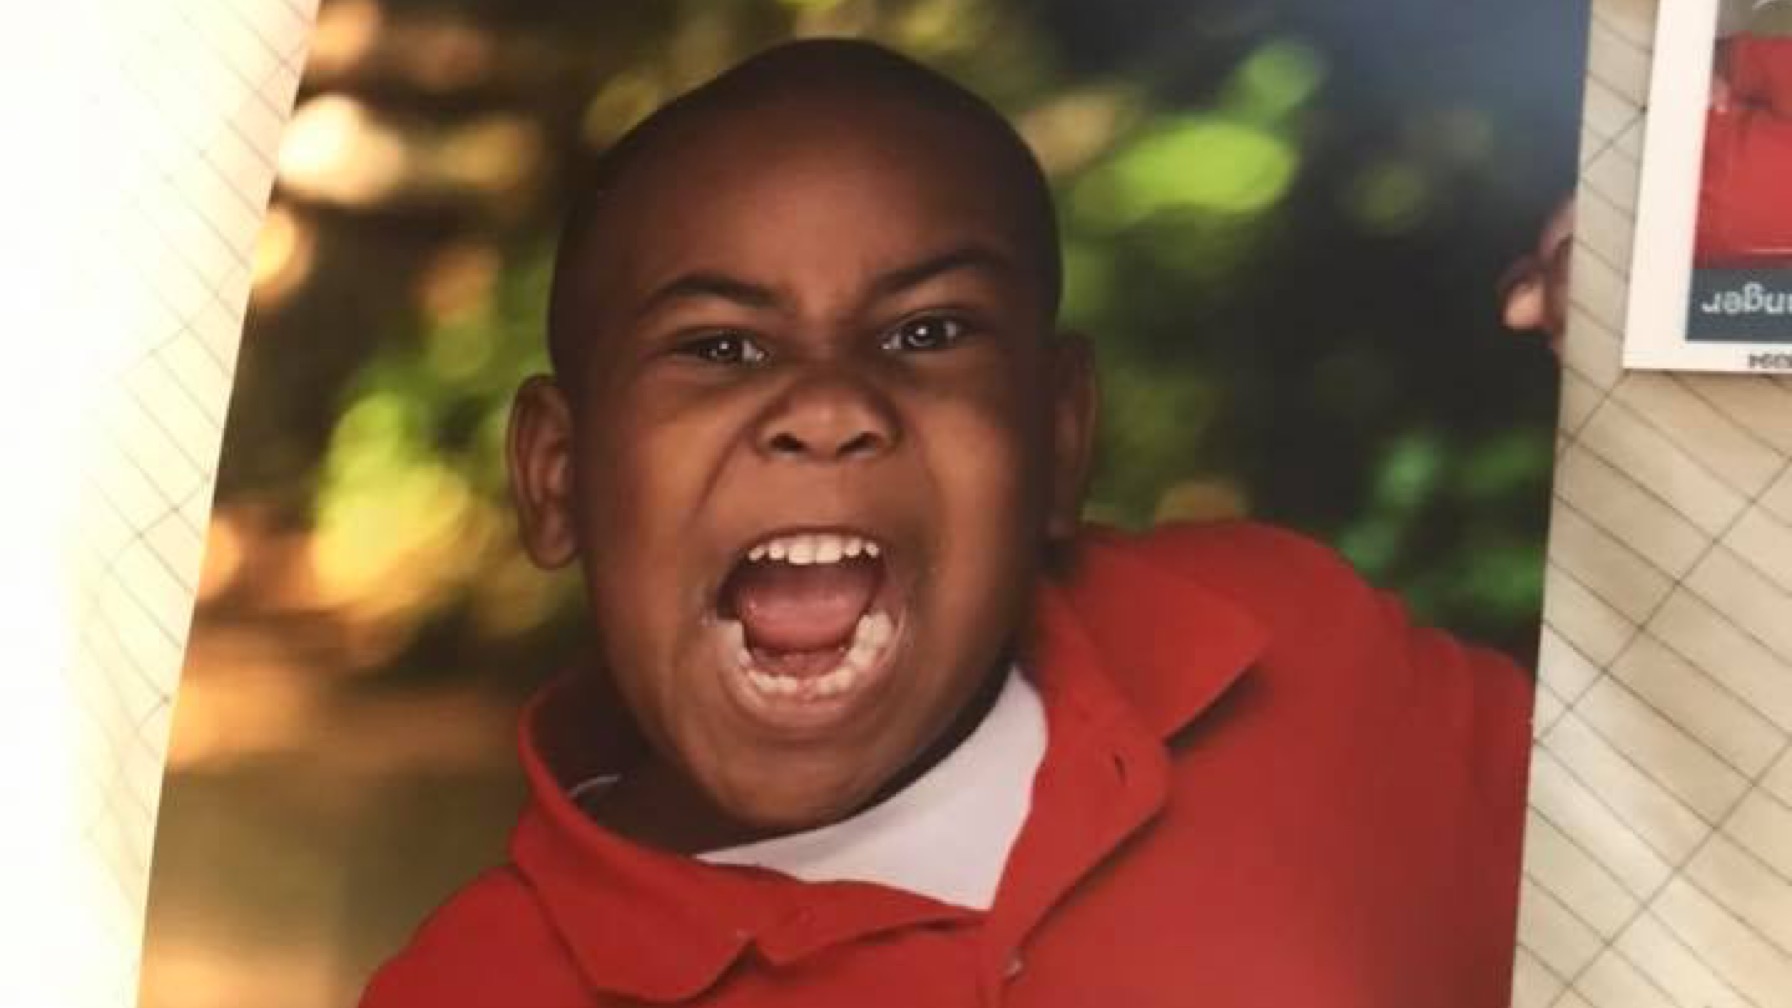 Mom Vents About Son's Hilarious School Photos, Ends Up Going Viral